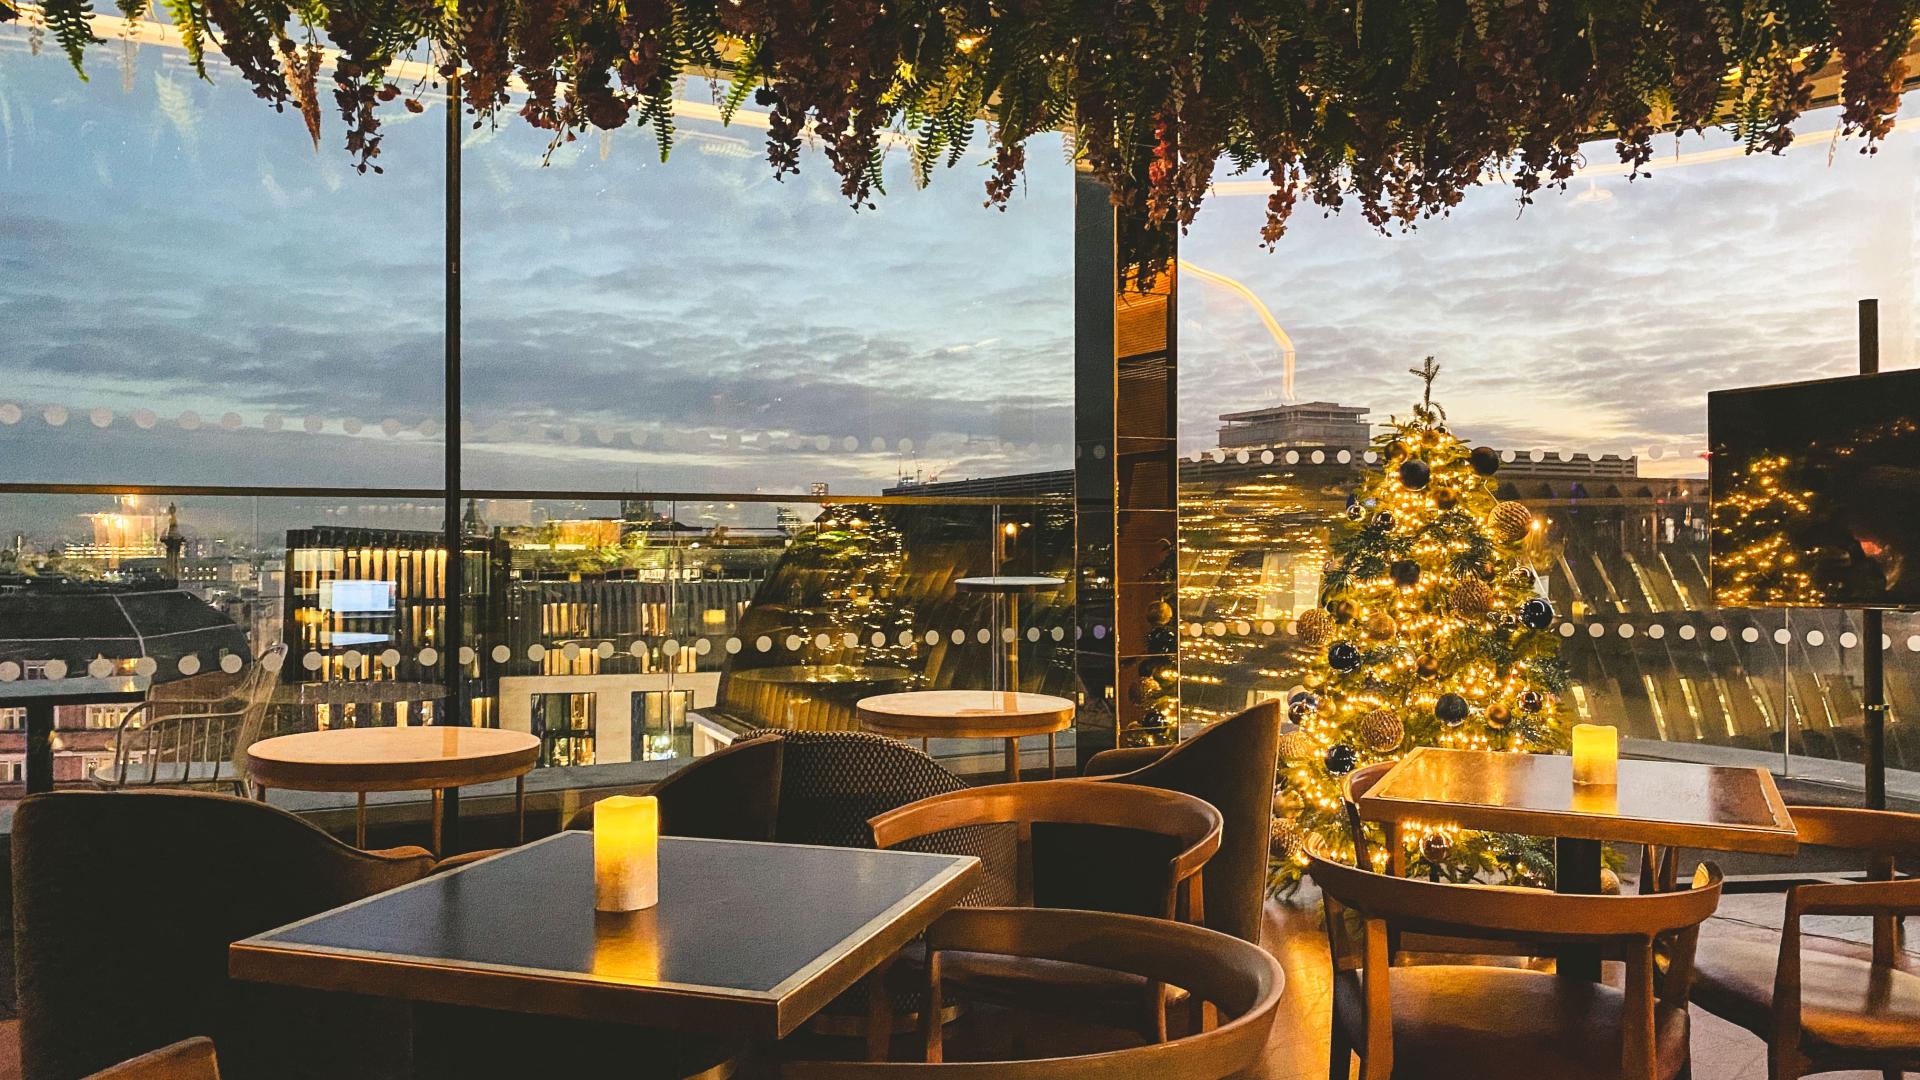 Christmas Party Packages to Book in London